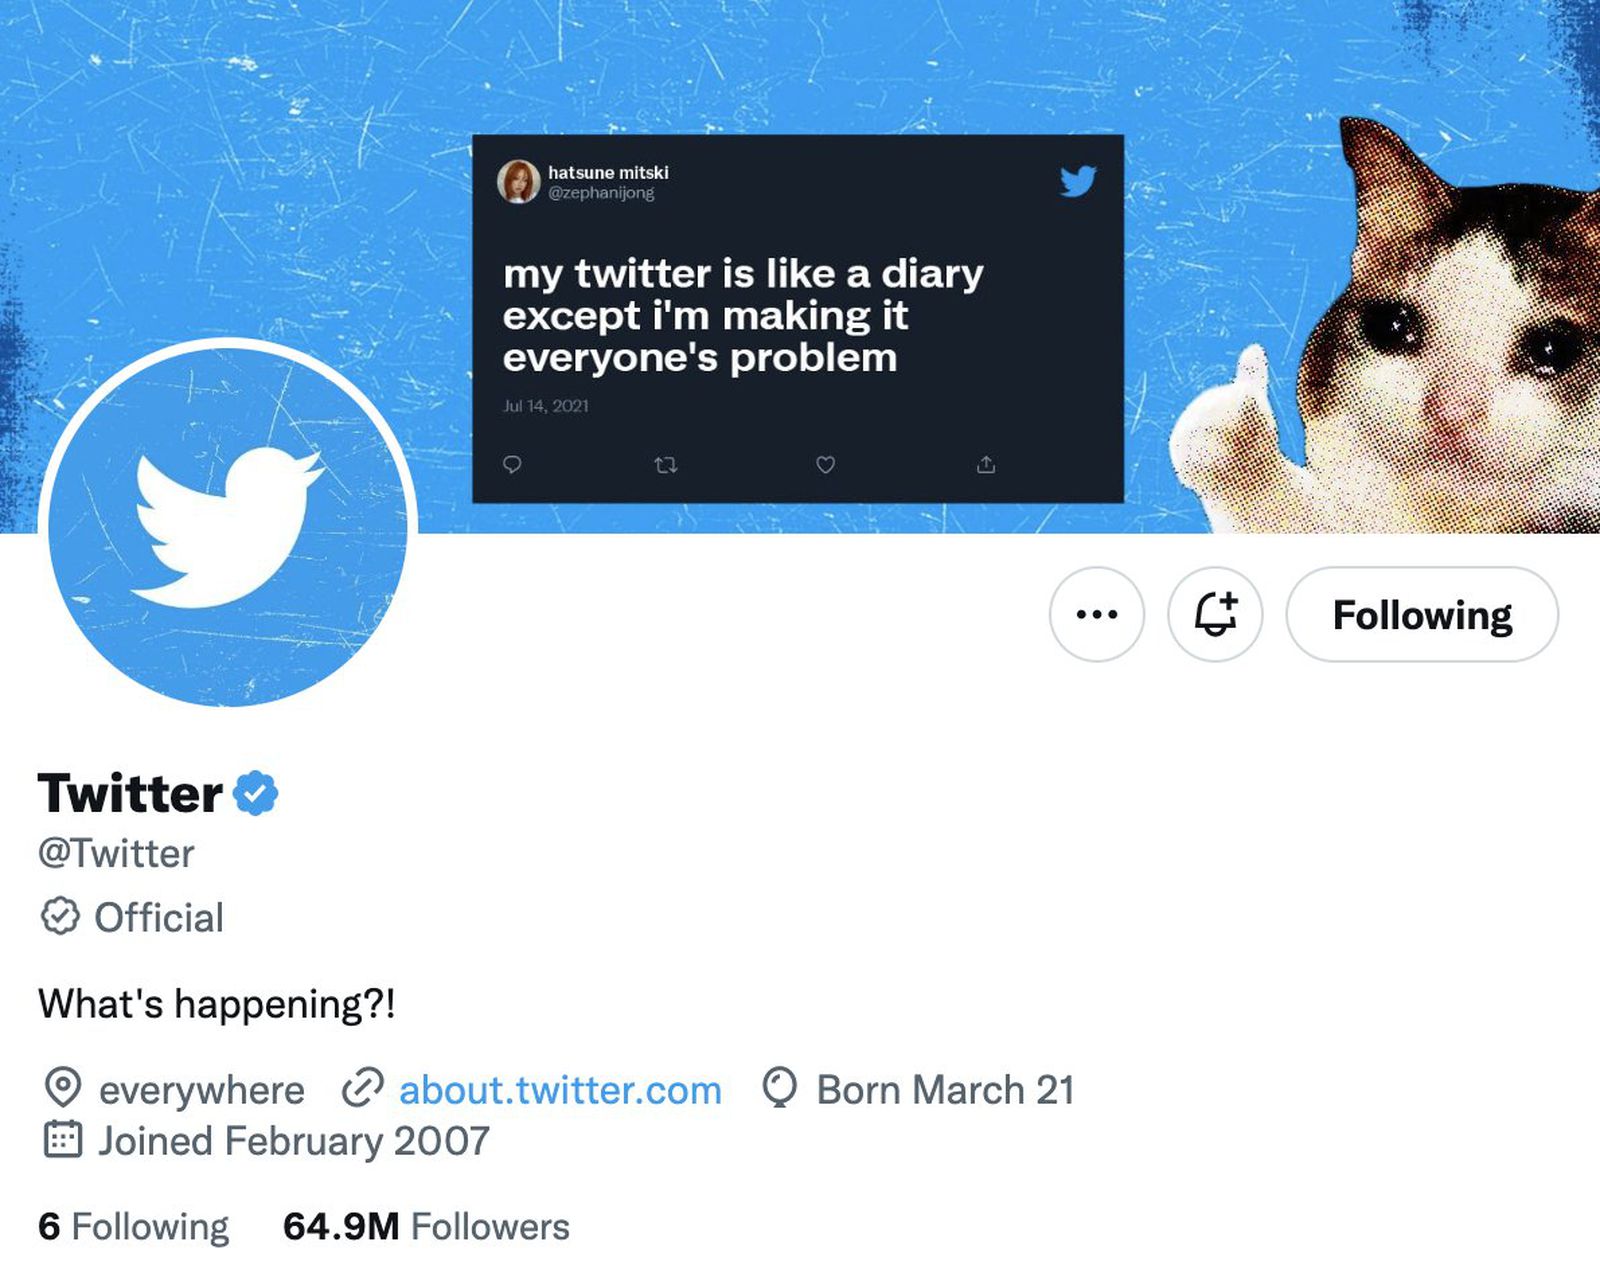 Elon Musk Nixes 'Official' Label for Already Verified Twitter Accounts, Says Blue Check Will Be 'the Great Leveler' - macrumors.com